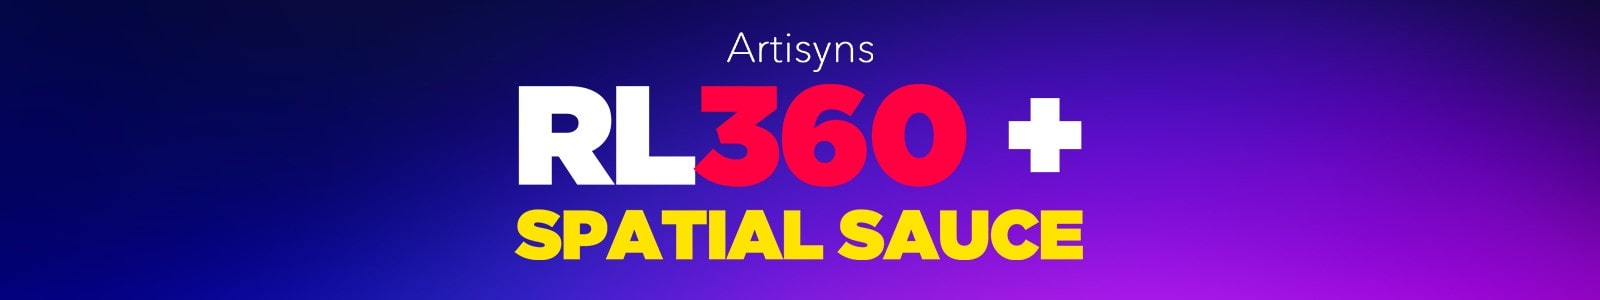 rL360 Session + Spatial Sauce Bundle by Artisyns